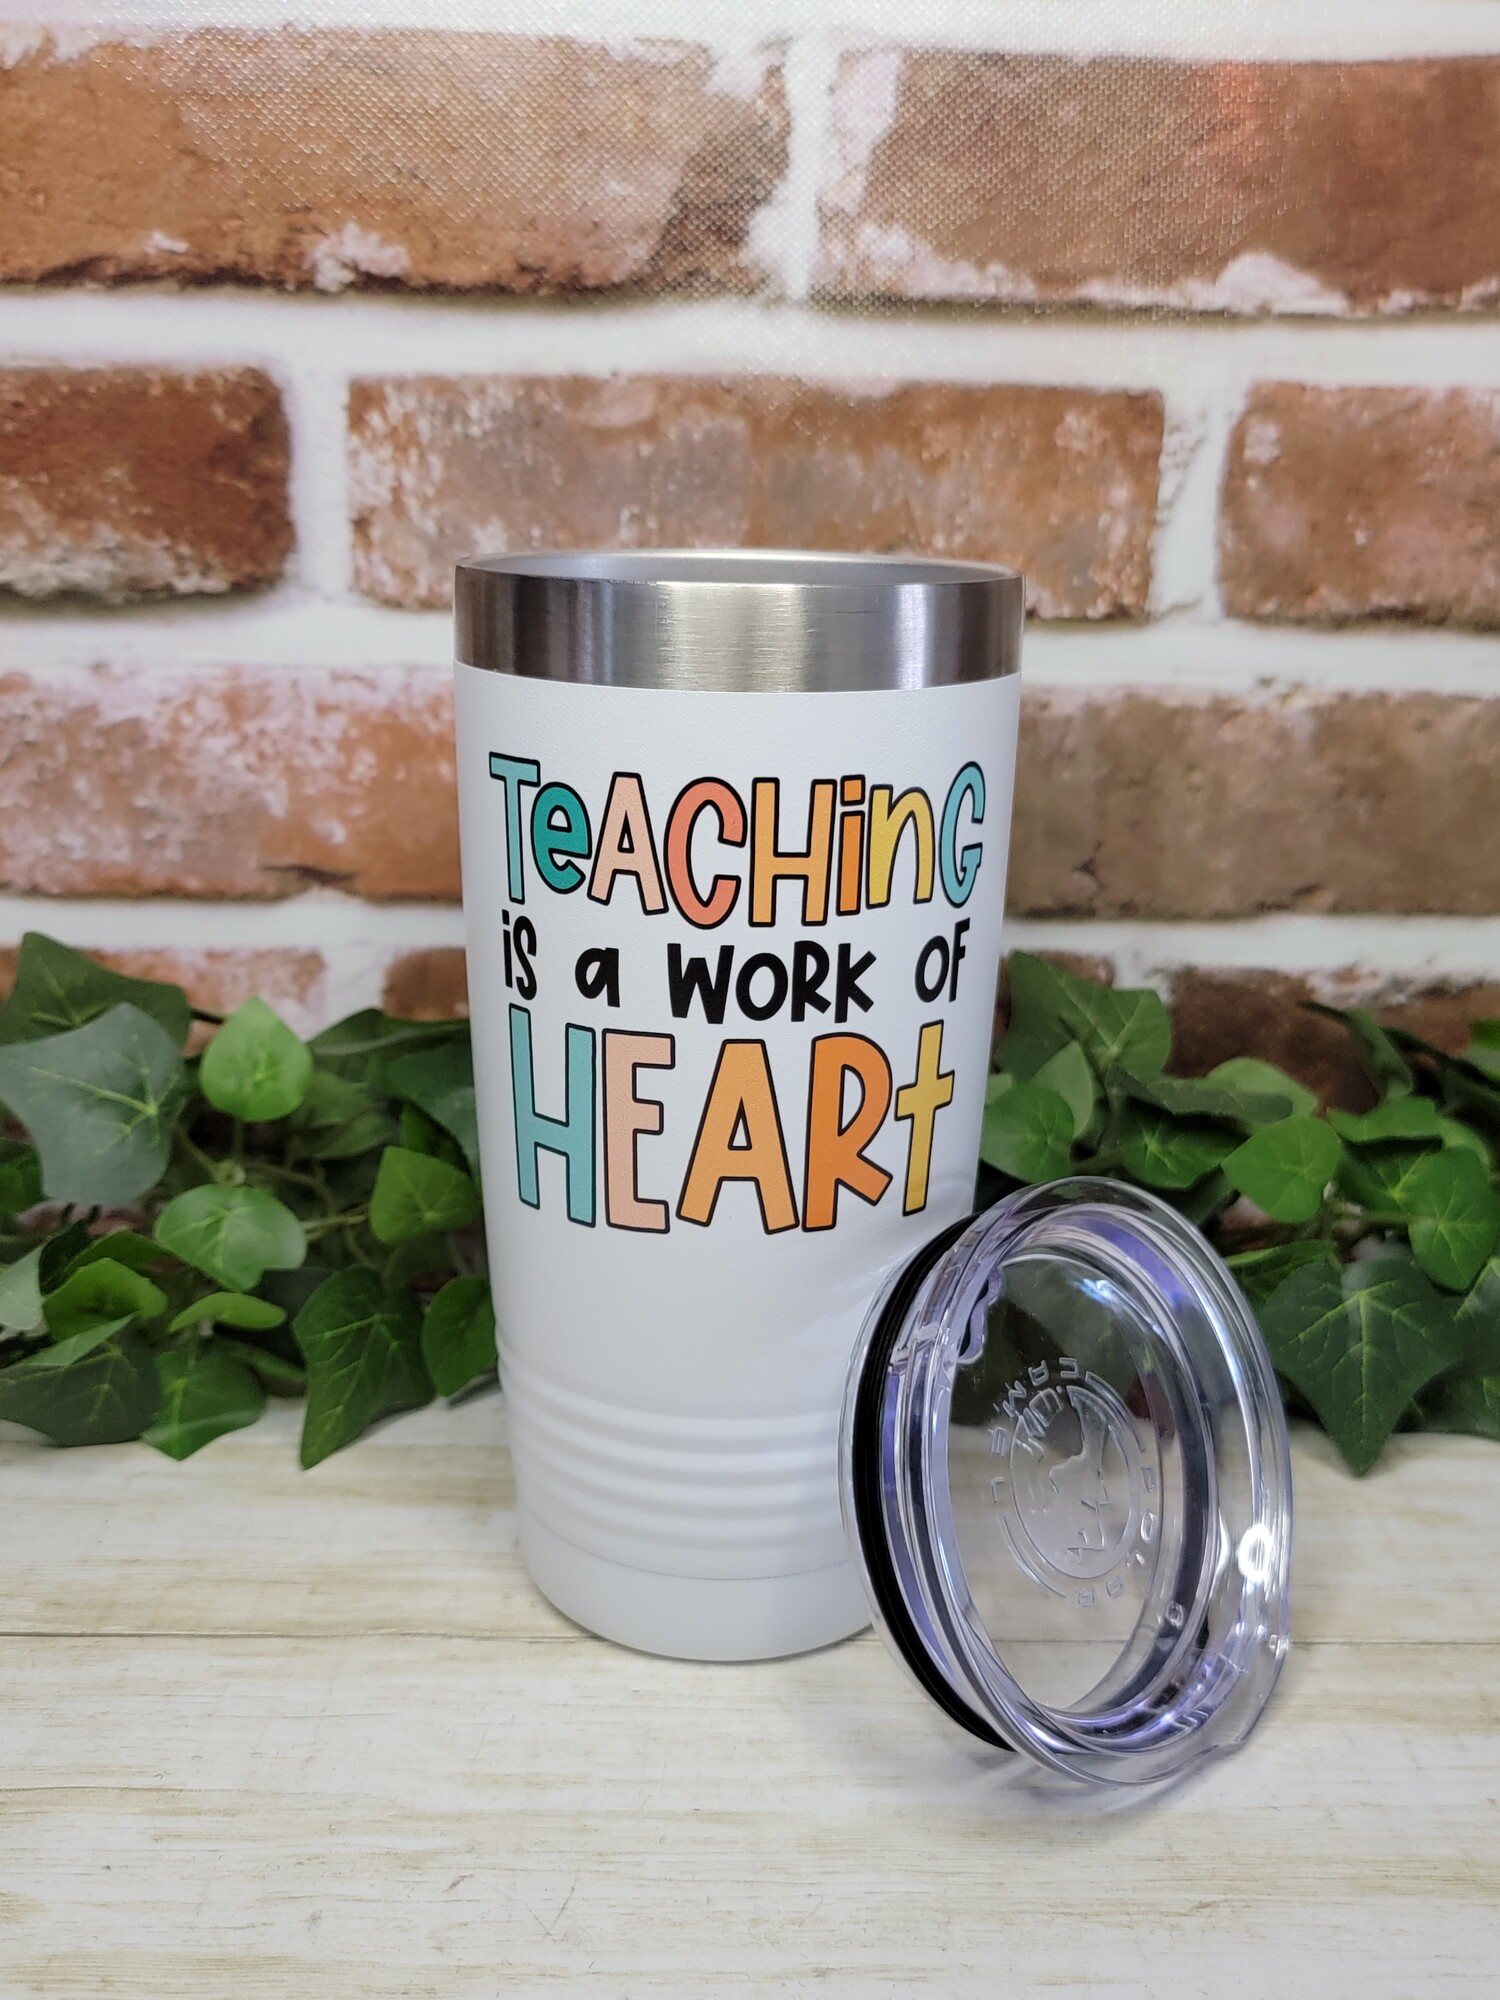 Teaching is a Work of Heart. Our custom printed tumbler will make a great gift for that teacher in your life. They will keep that special teachers coffee or cocoa warm for hours.

Our Tumblers are powder coated and stainless steel; double wall vacuum insulated. Keep your drinks ice cold longer and it is great for hot beverages. The clear lid even allows for use of straws!- Double wall 18/8 stainless steel construction

- Features copper insulation that keeps drinks HOT for 8 hours and COLD for 16 hours
- Tapered design that easily fits in cup holders
- Clear push-on lid
- No sweat Exterior
- Hand wash recommended

We UV Print the cups; so there is no worries of a vinyl decal peeling or coming off.